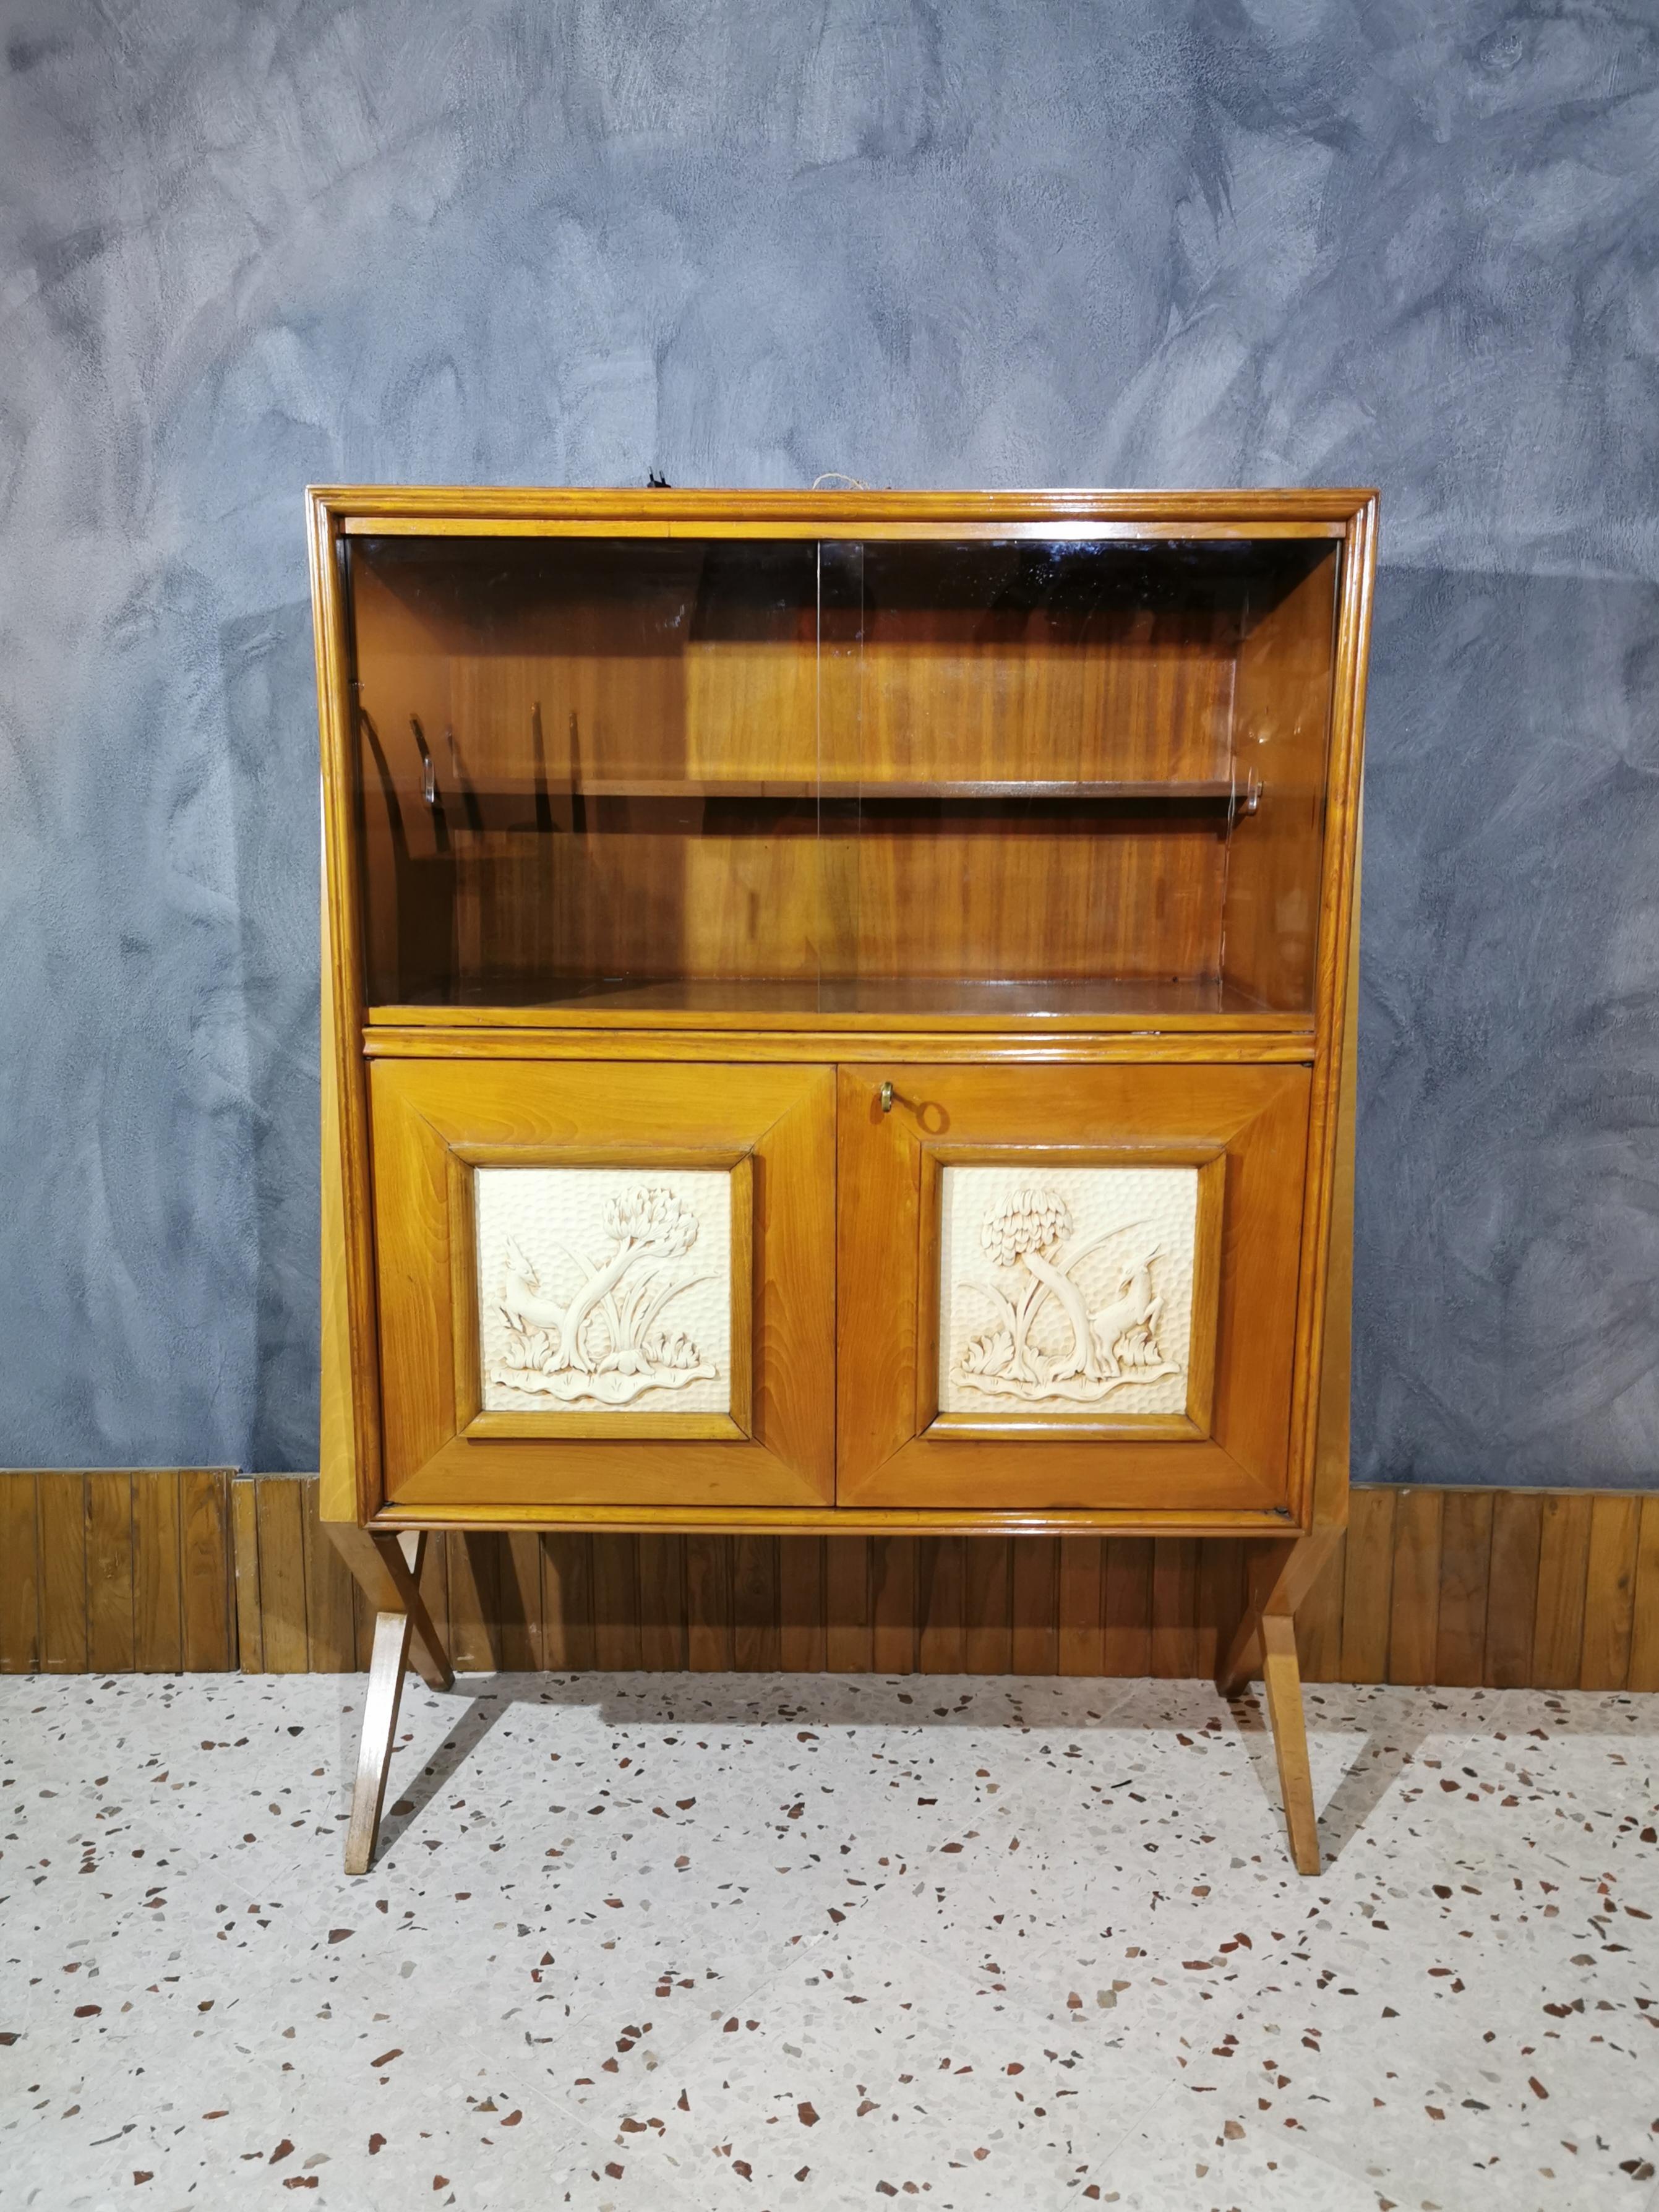 Particular Cantù 'showcase in beech wood with showcase compartment in the upper part, the two doors have wooden engraving with shelves and drawers inside,
from the 1950s. Italian production.